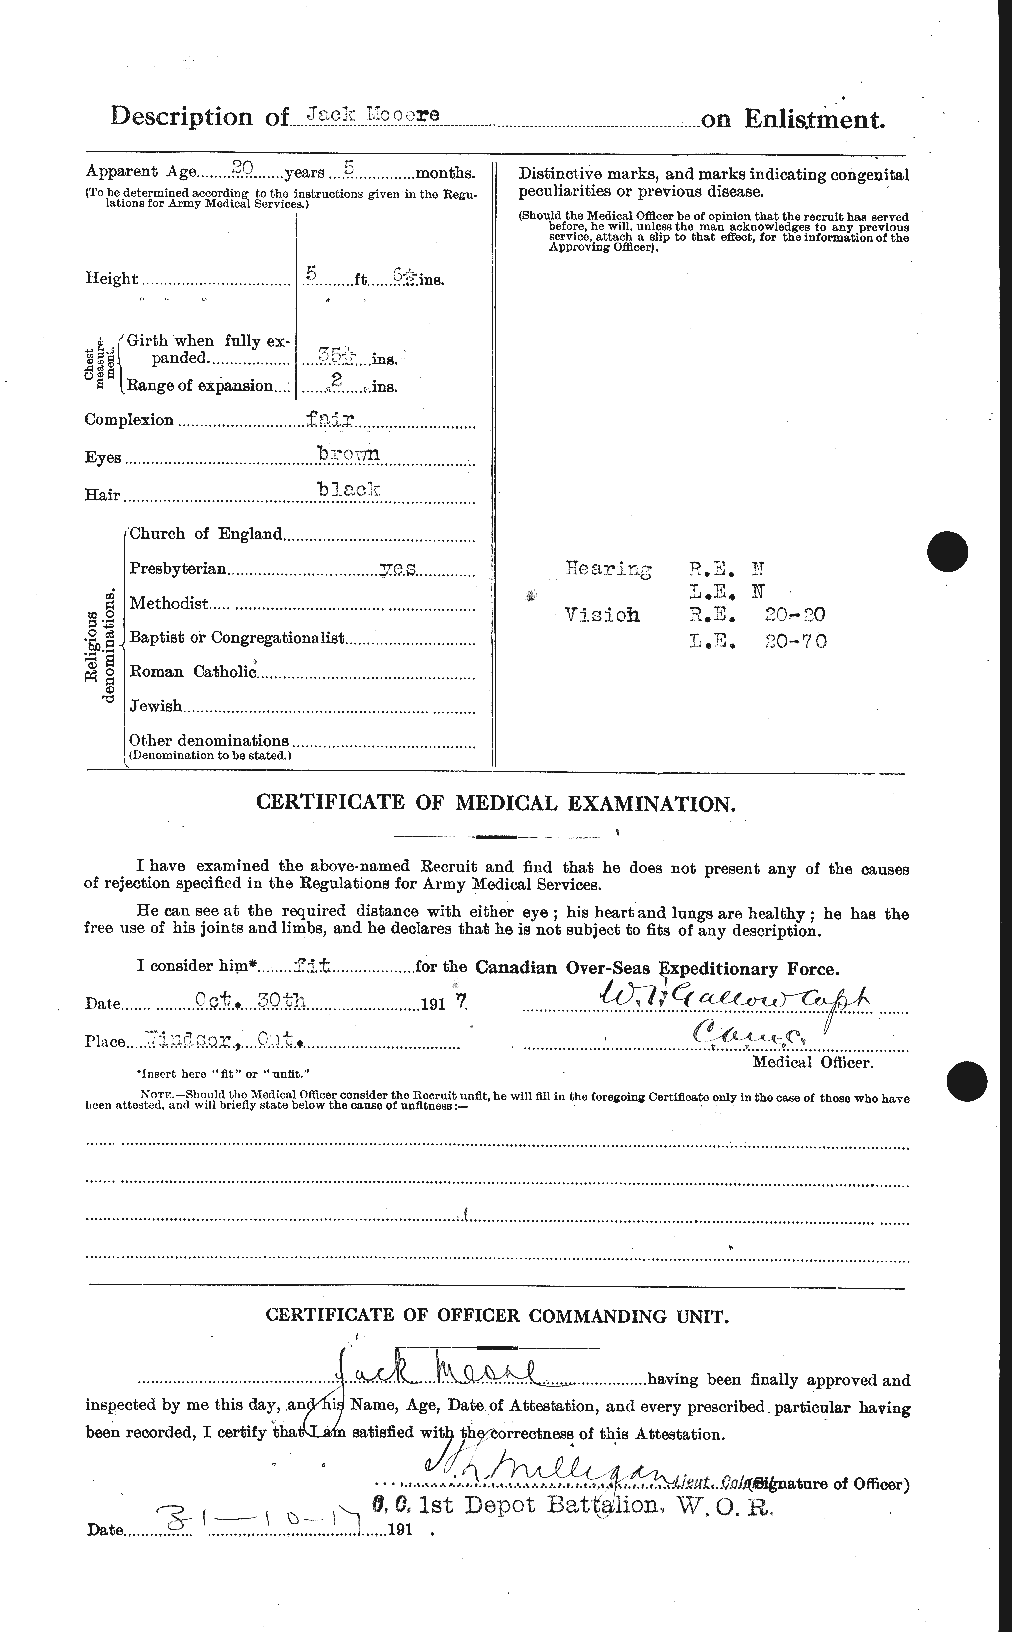 Personnel Records of the First World War - CEF 502163b